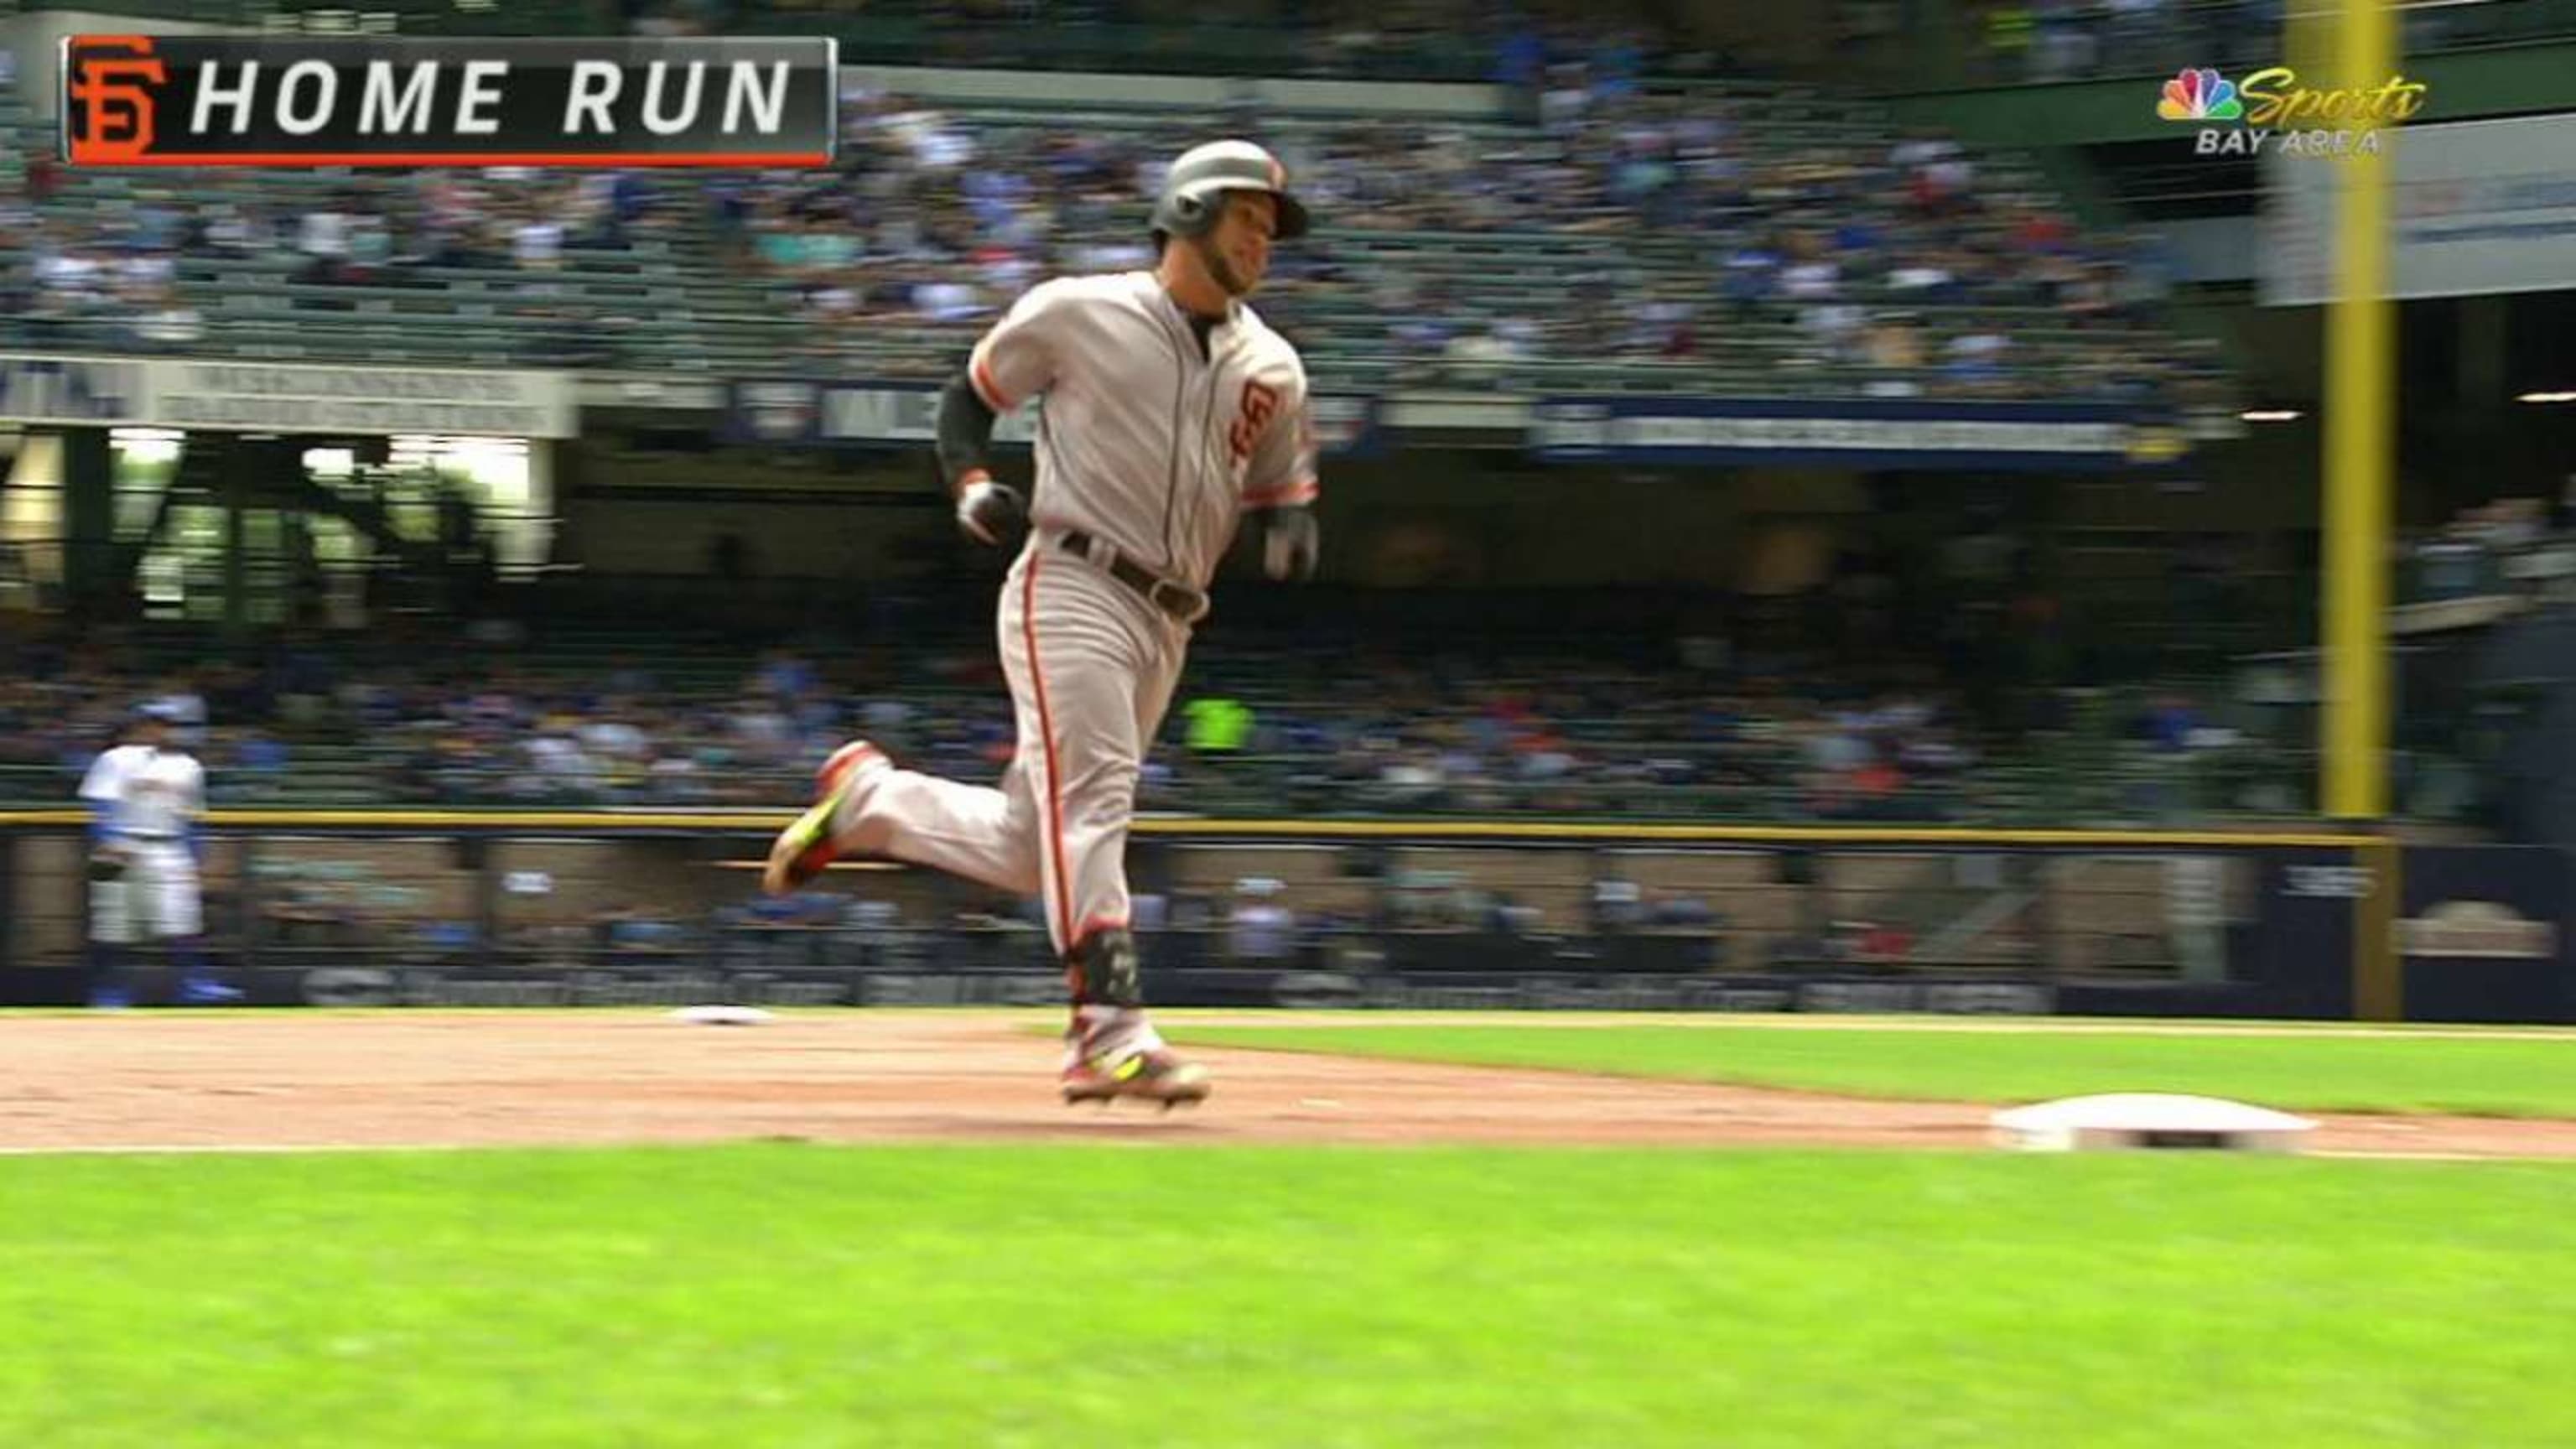 Giants' Madison Bumgarner beats Brewers for 7th win in row